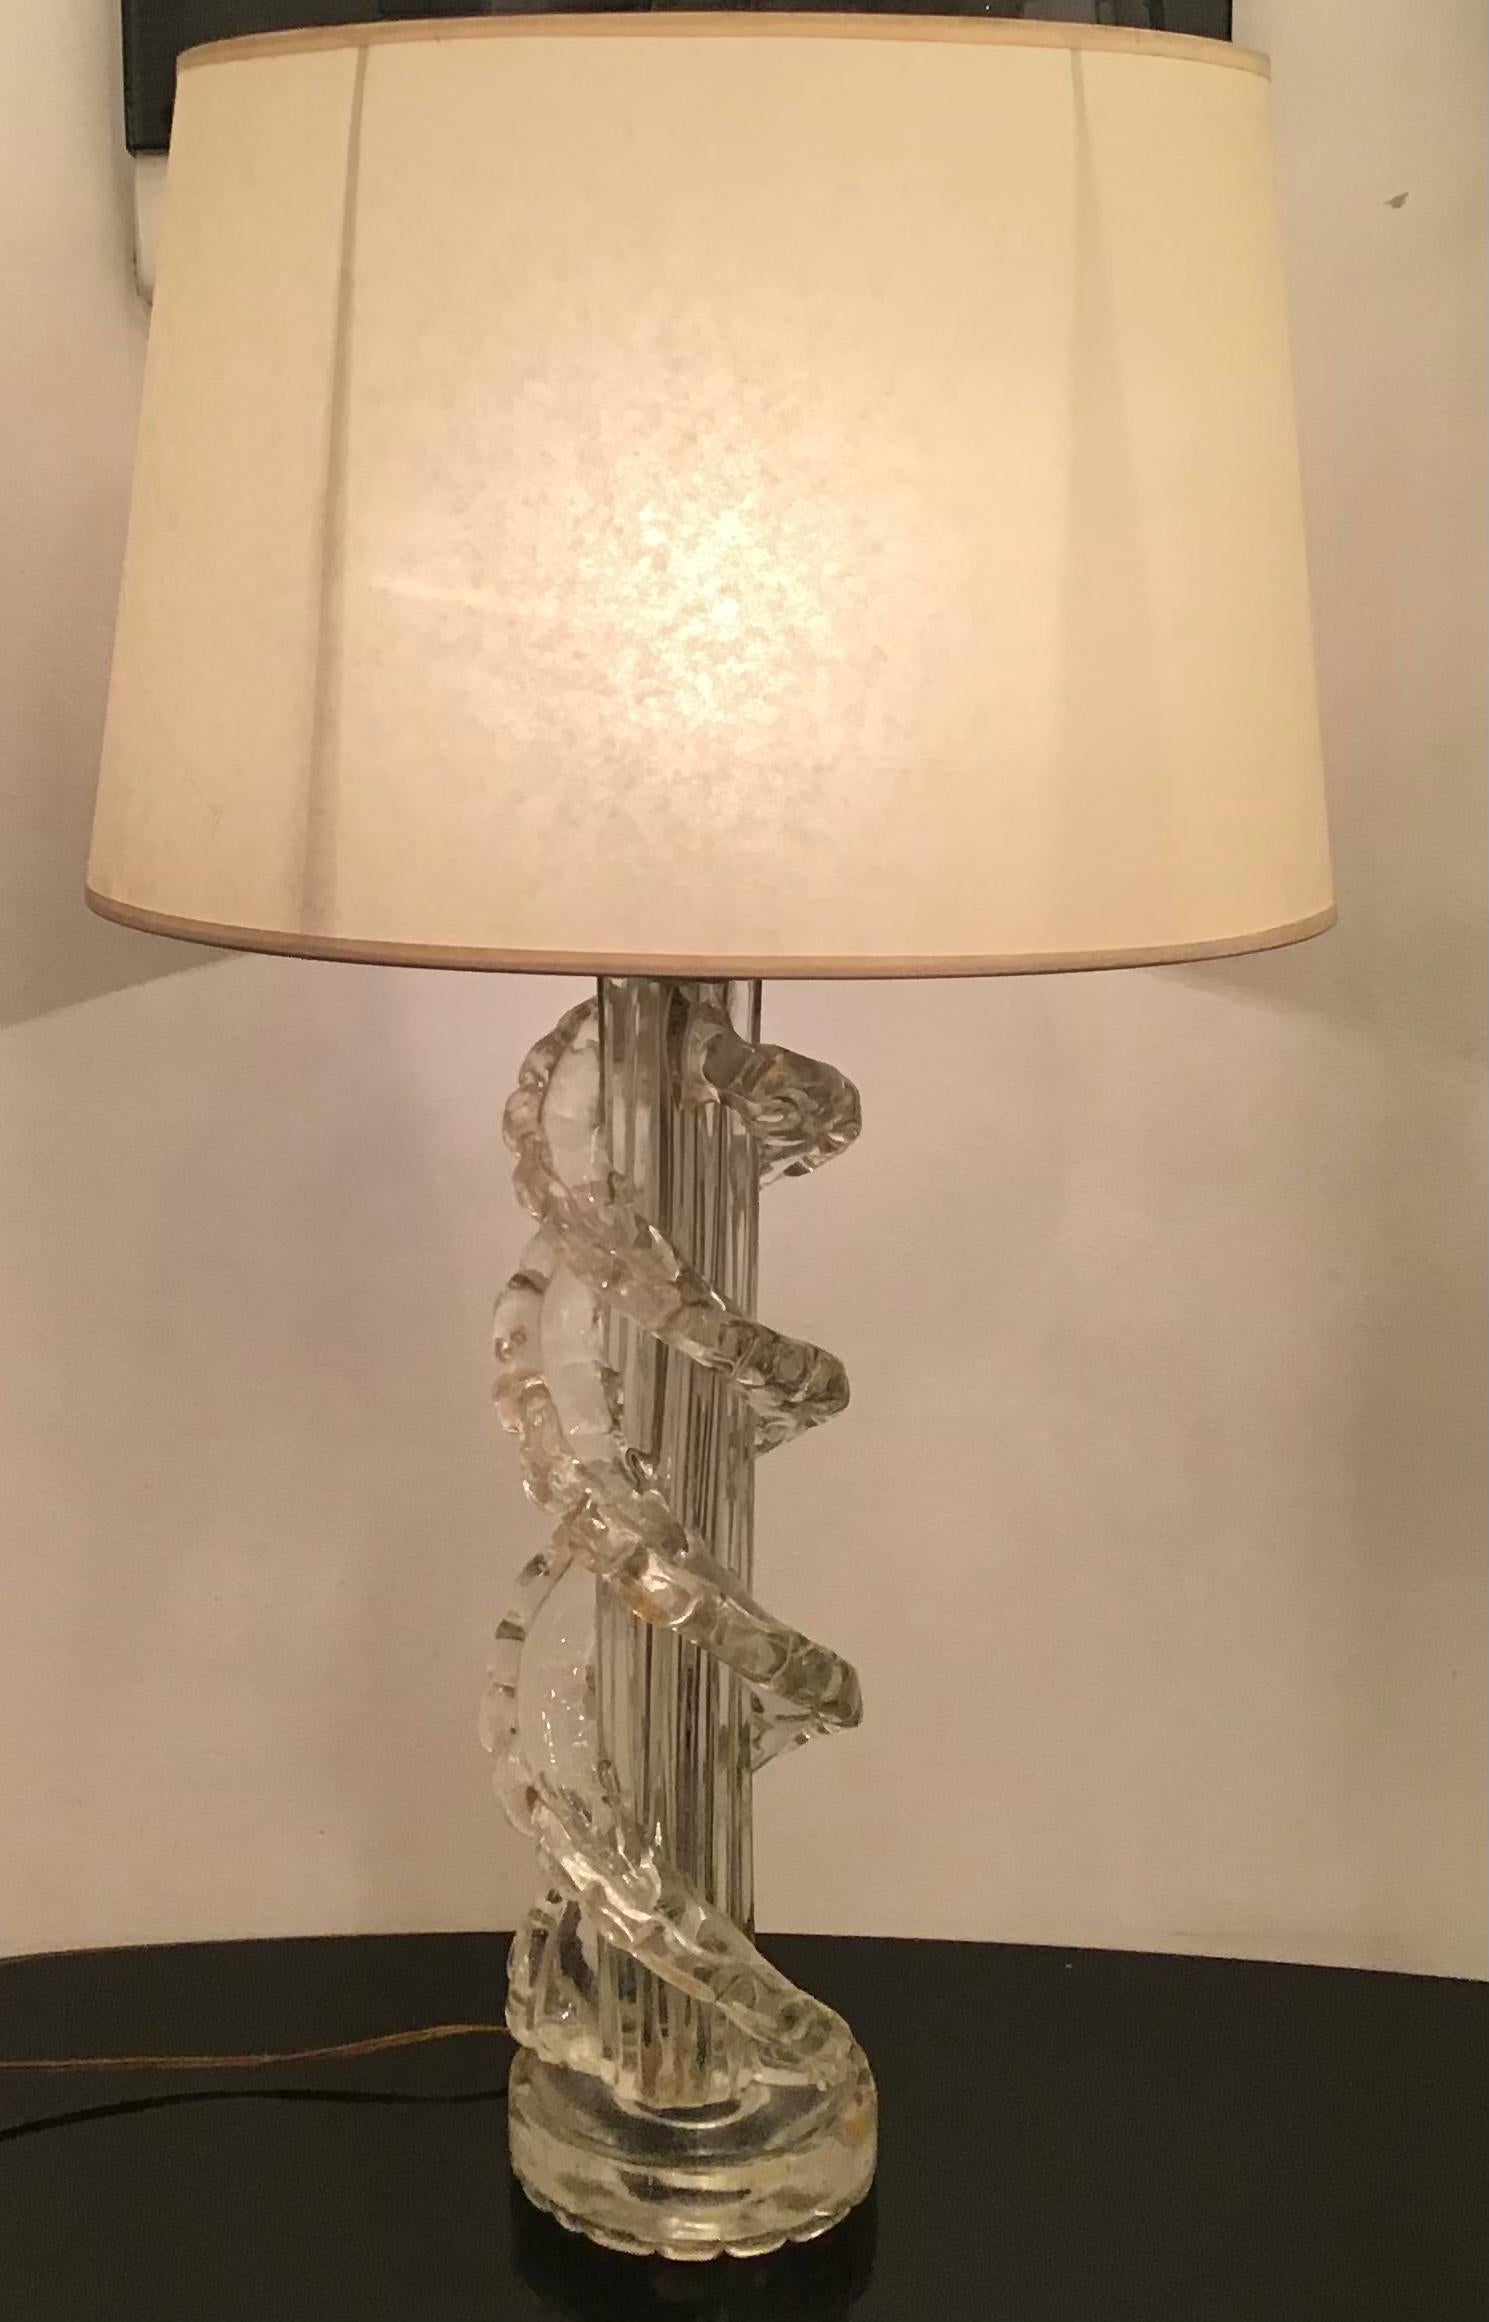 Ercole Barovier Table Lamp Murano Glass Brass Parchment Lampshade 1940 Italy For Sale 1